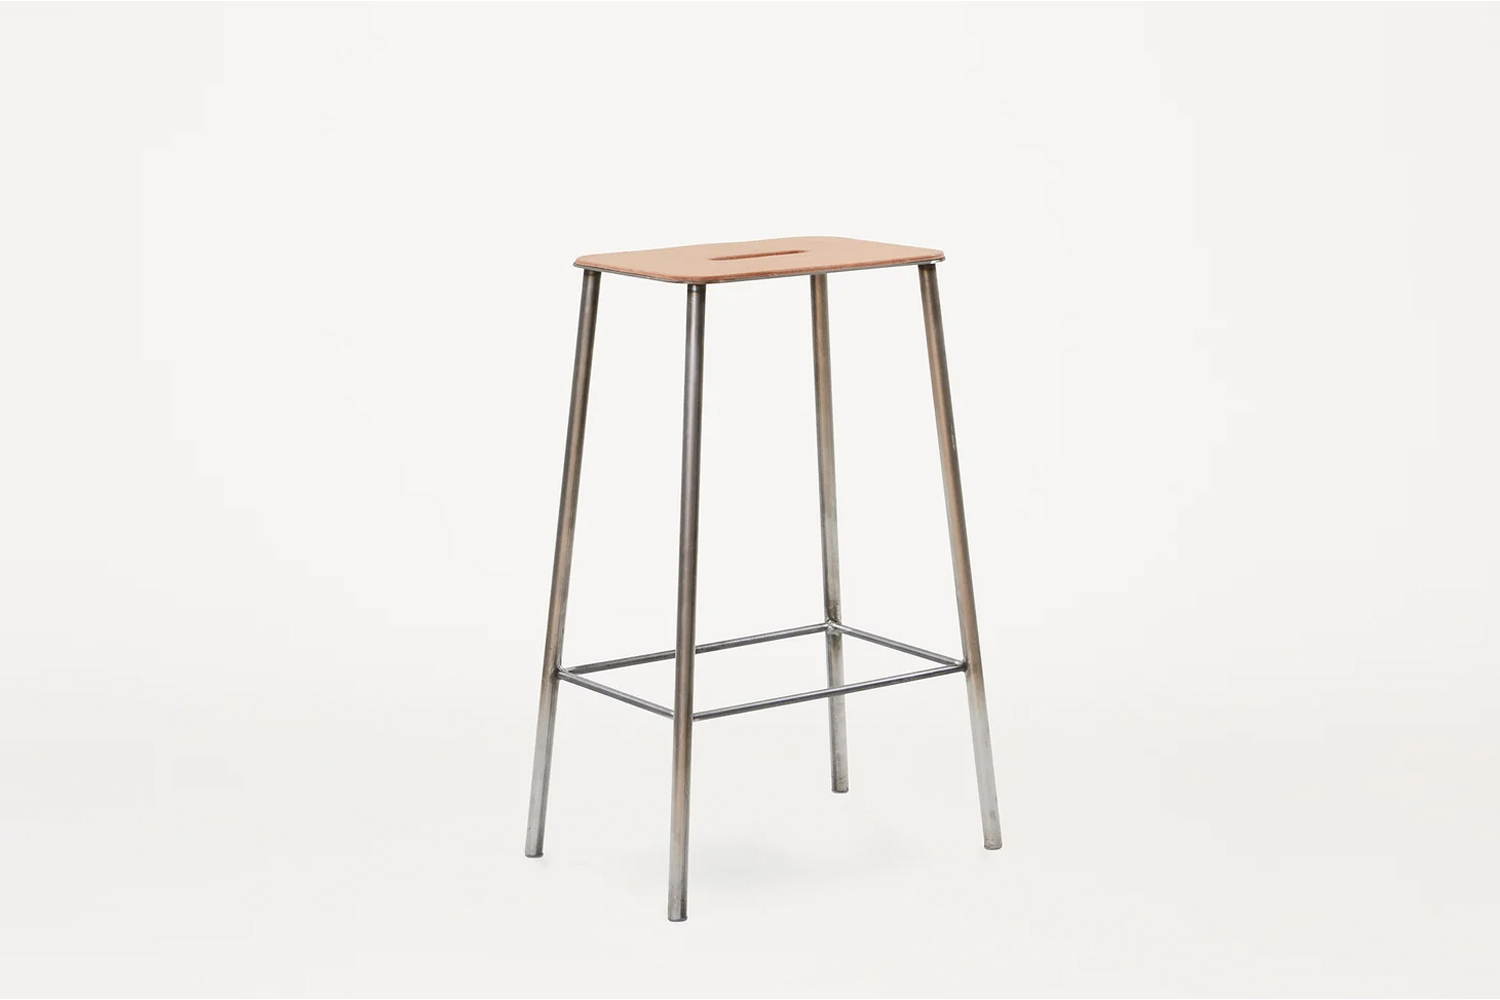 the frama adam stool, shown in natural leather and raw steel, is one of a few c 9